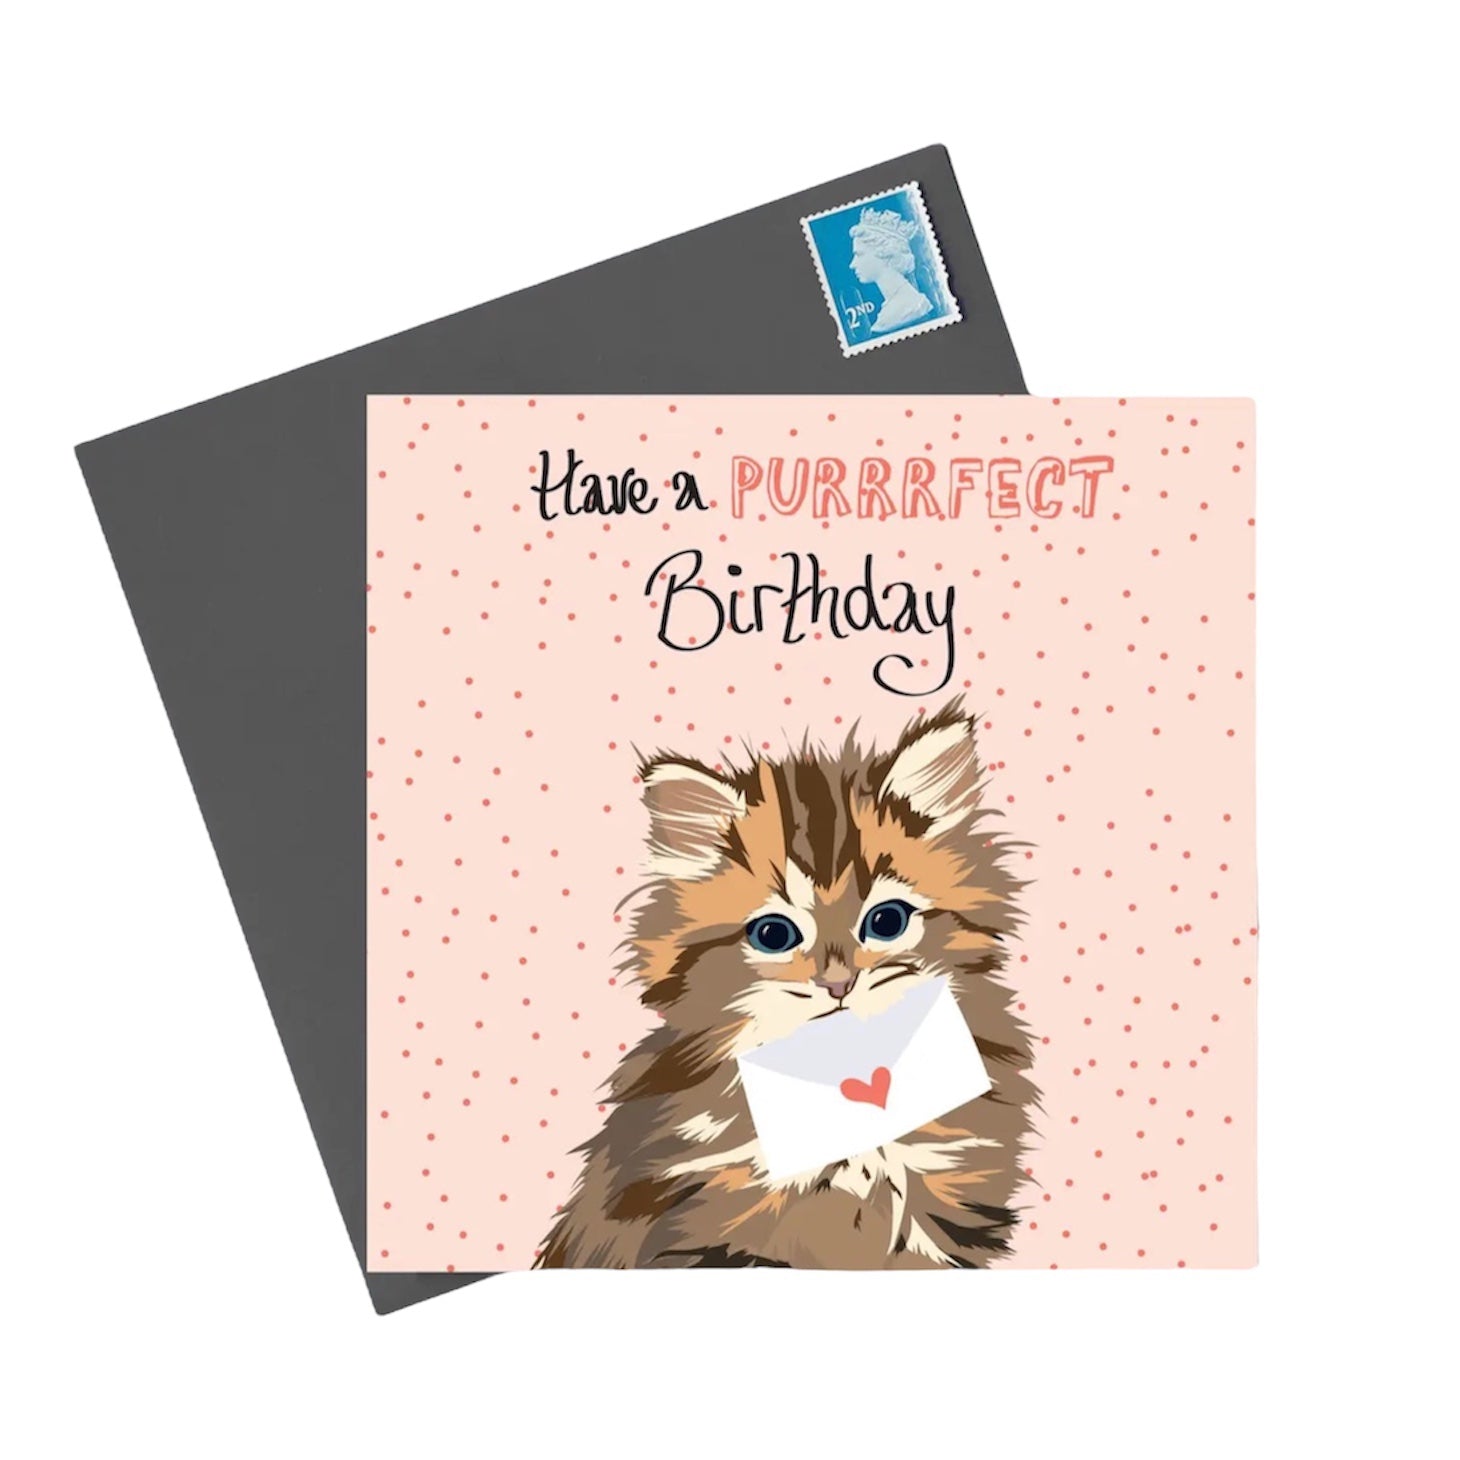 Have A Purrrfect Birthday Cat Card